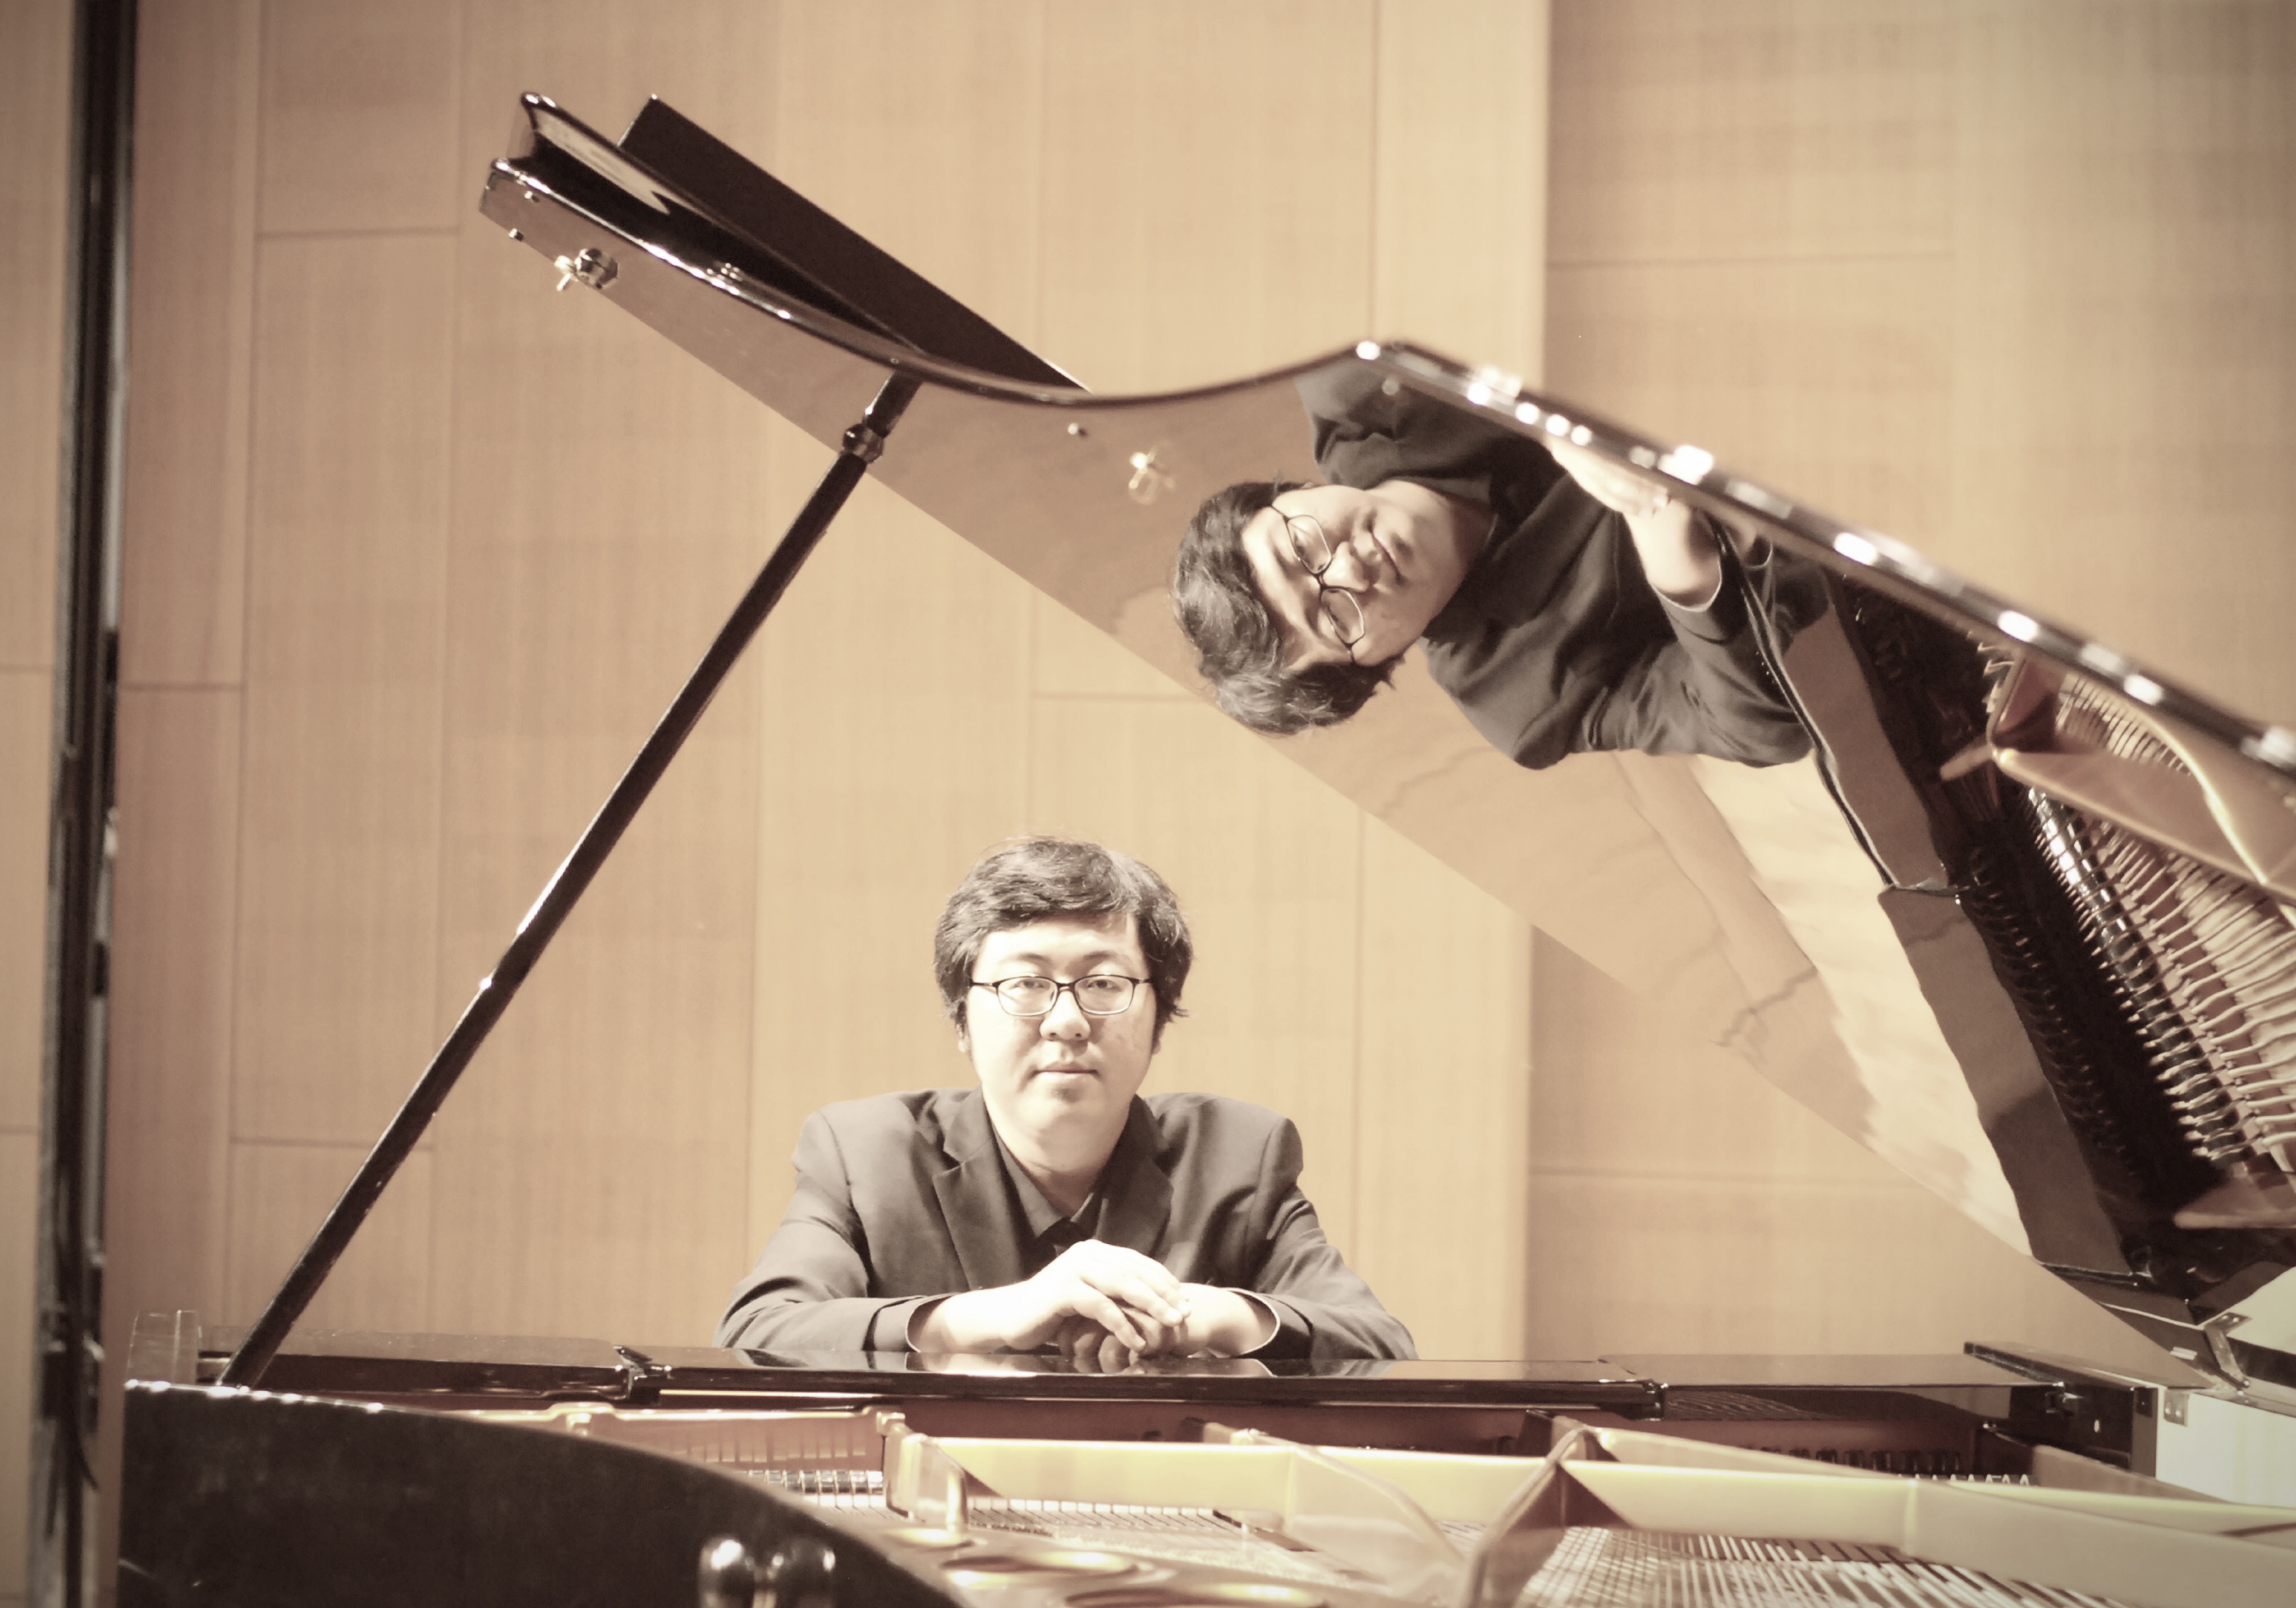 The University of North Texas College of Music’s Baolong Zhang has won the Virgi